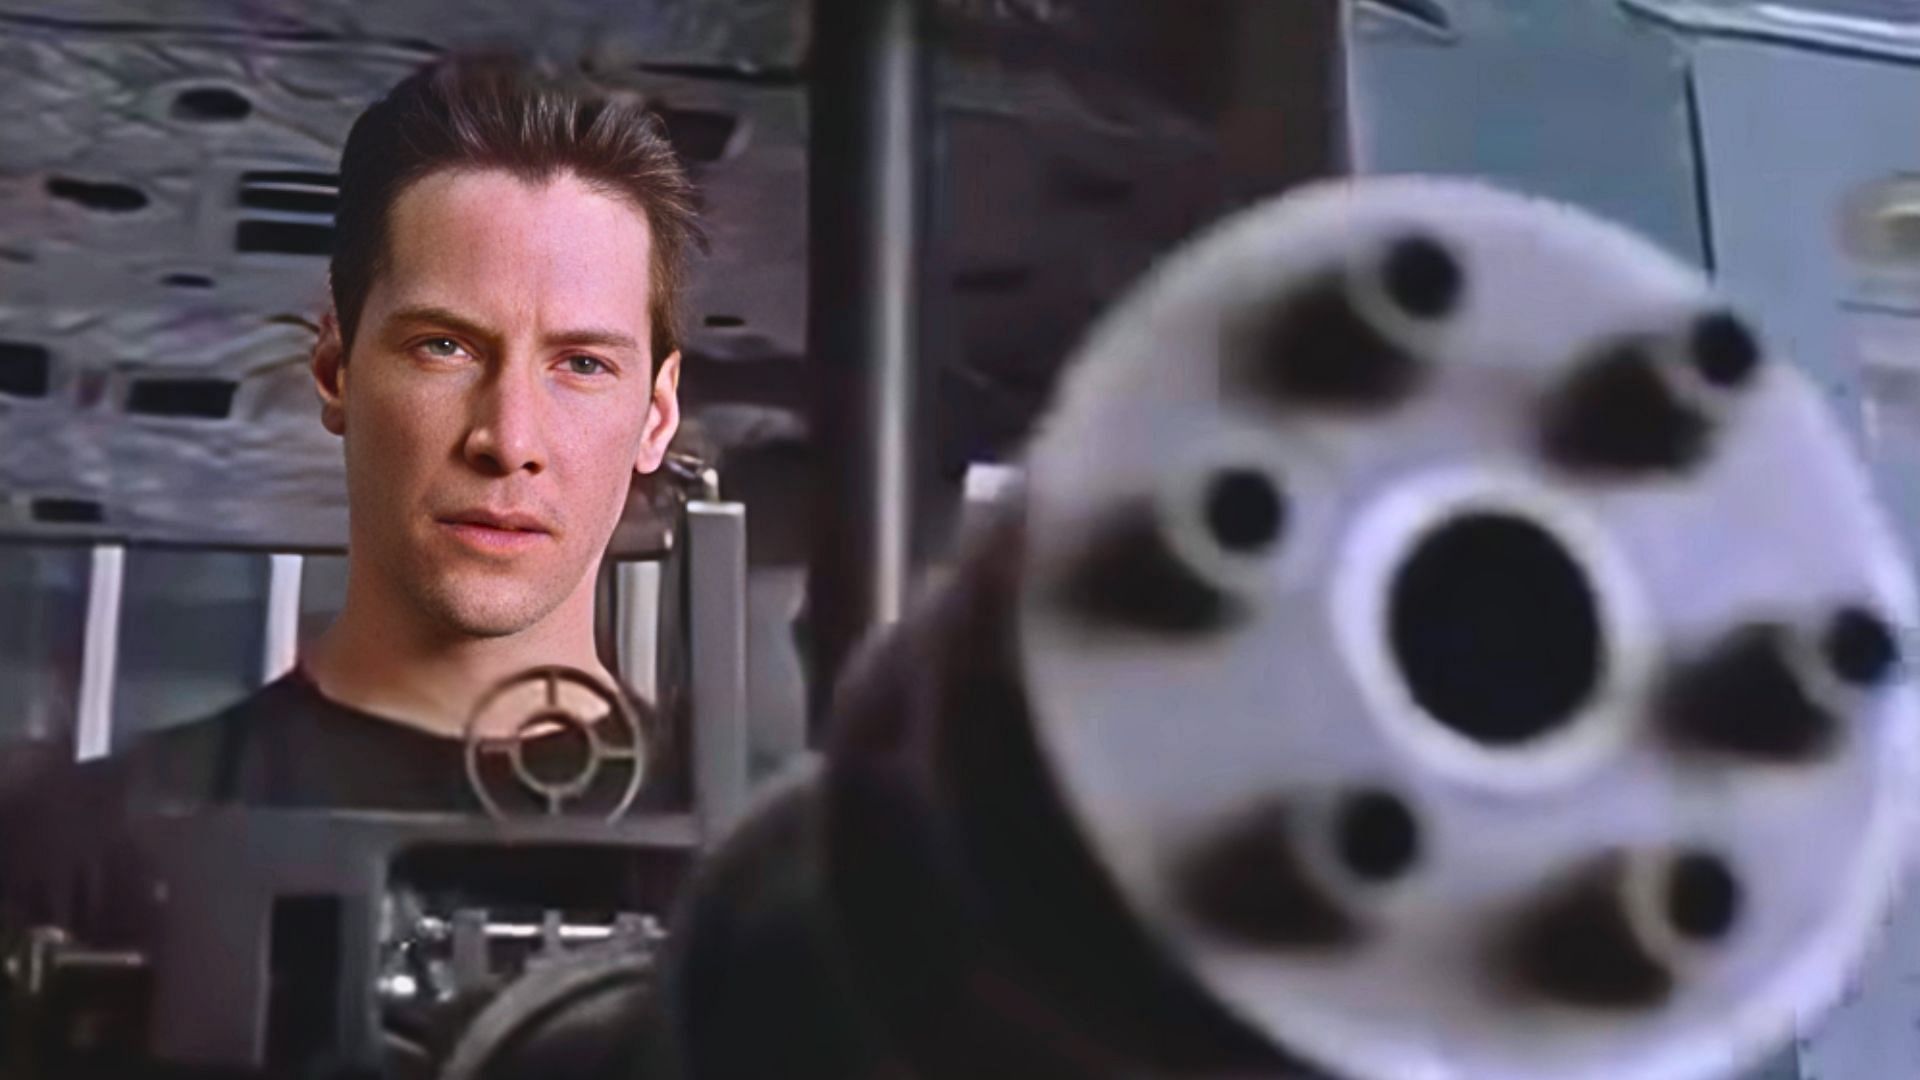 Keanu Reeves was 35 years old when The Matrix was released in 1999 (Image via YouTube/Rotten Tomatoes Classic Trailers, 1:54)